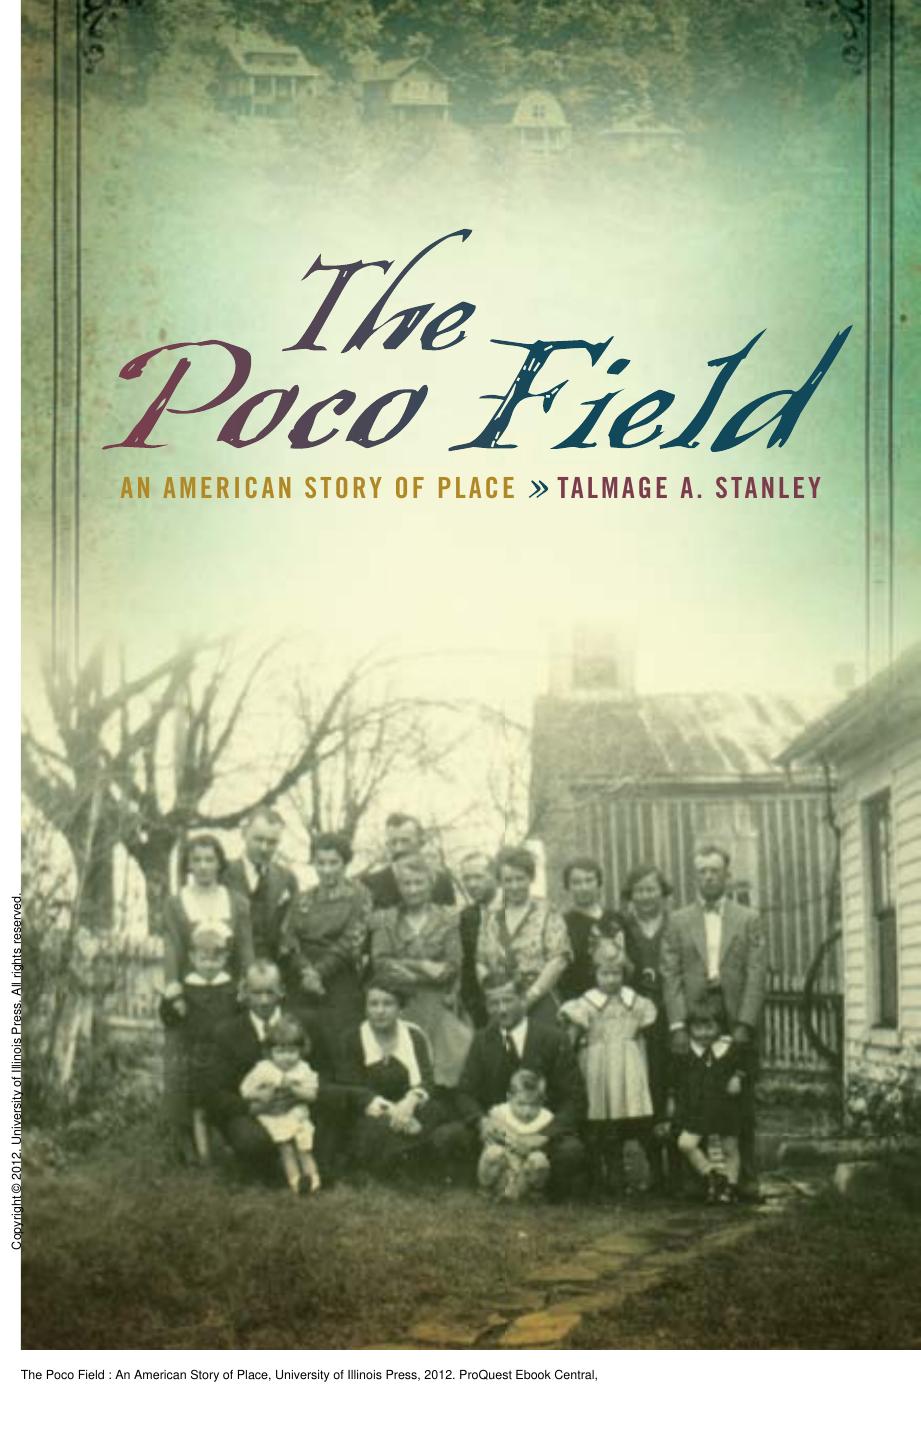 The Poco Field : An American Story of Place by Talmage A. Stanley